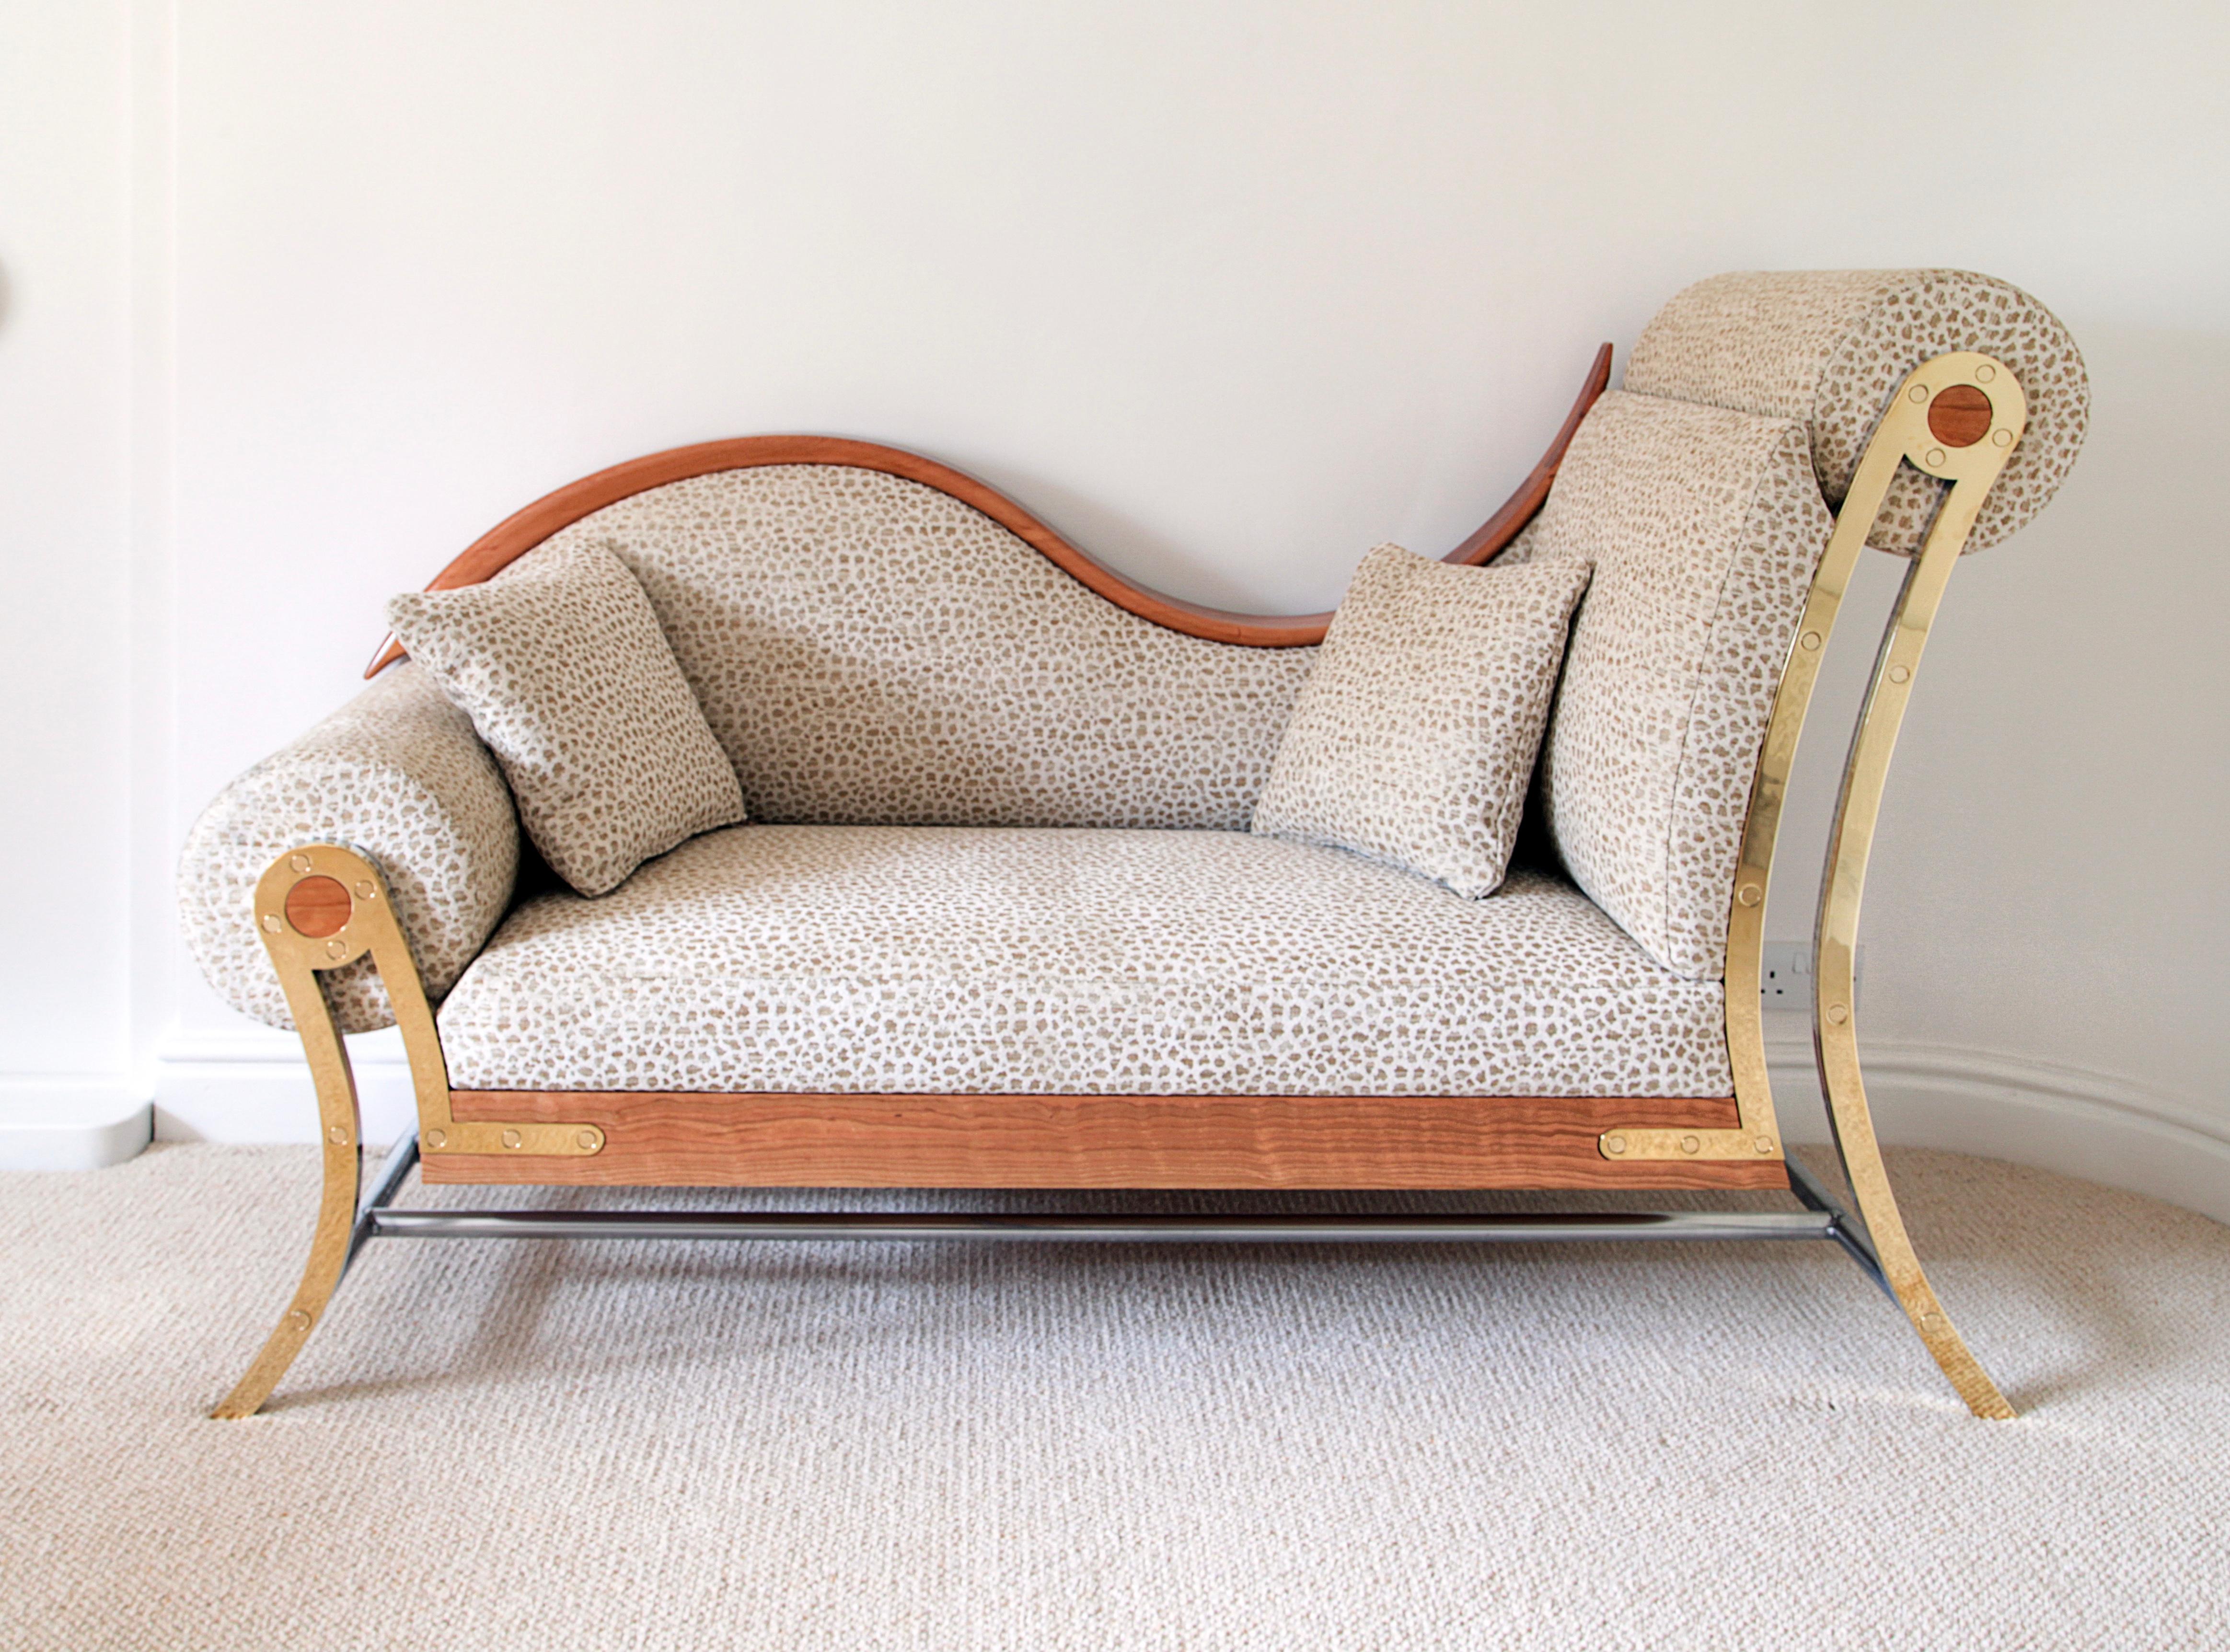 This made to order Chaise Lounge with its polished brass and aluminium components working in close harmony with the beautiful cotton velvet upholstery and hand crafted American Cherry offers the client the possibility to customise the dimensions,